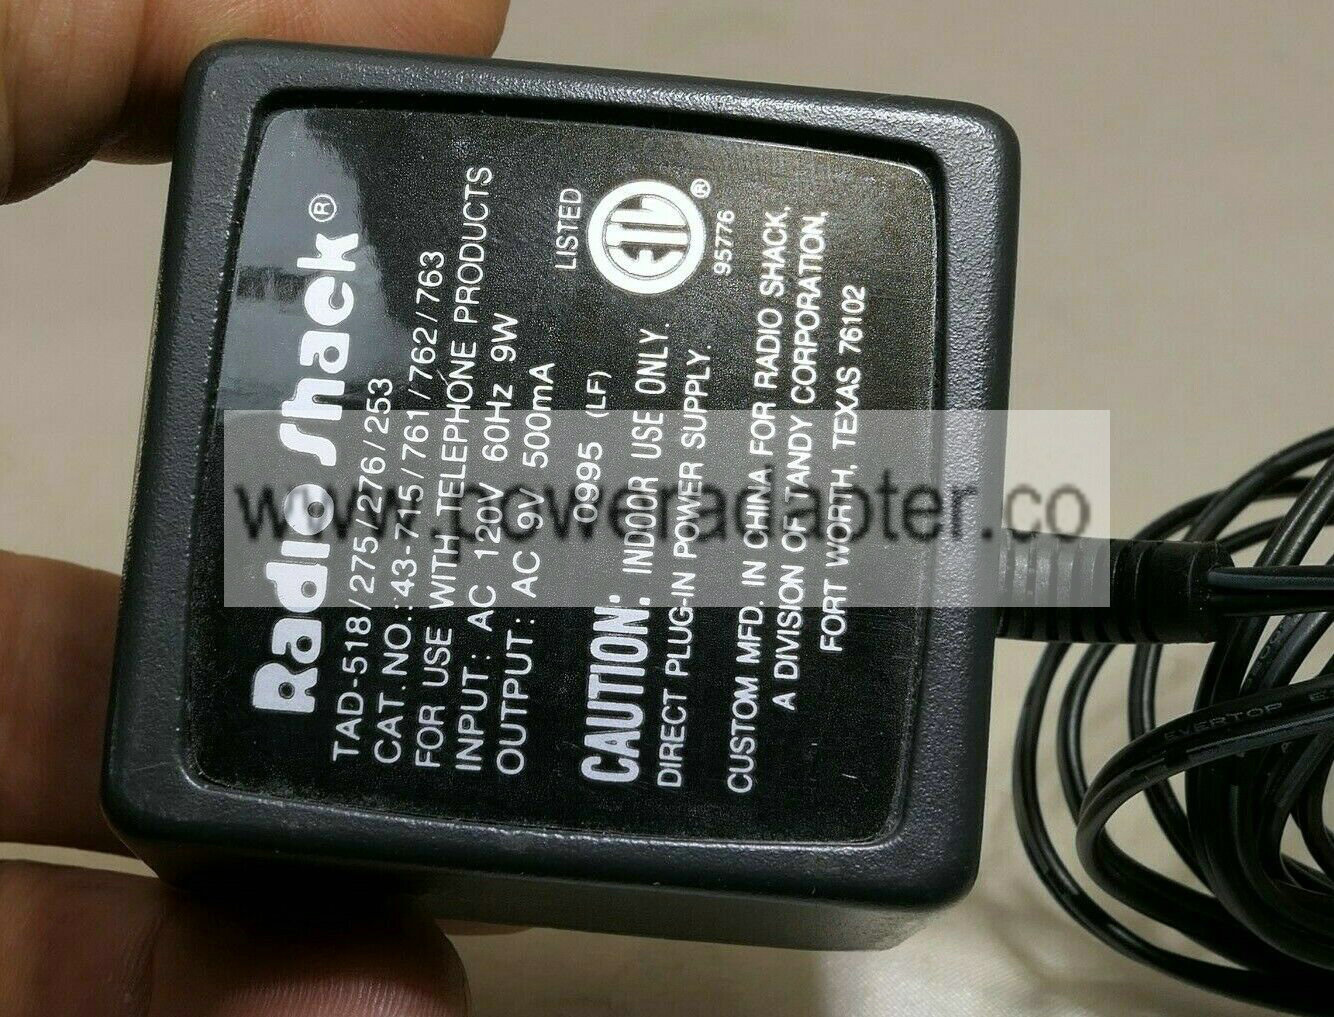 Radio Shack AC Adapter Power Supply cat no 43-715 761-62-63 for telephone phone it works good. End OD is 5.5mm. It w